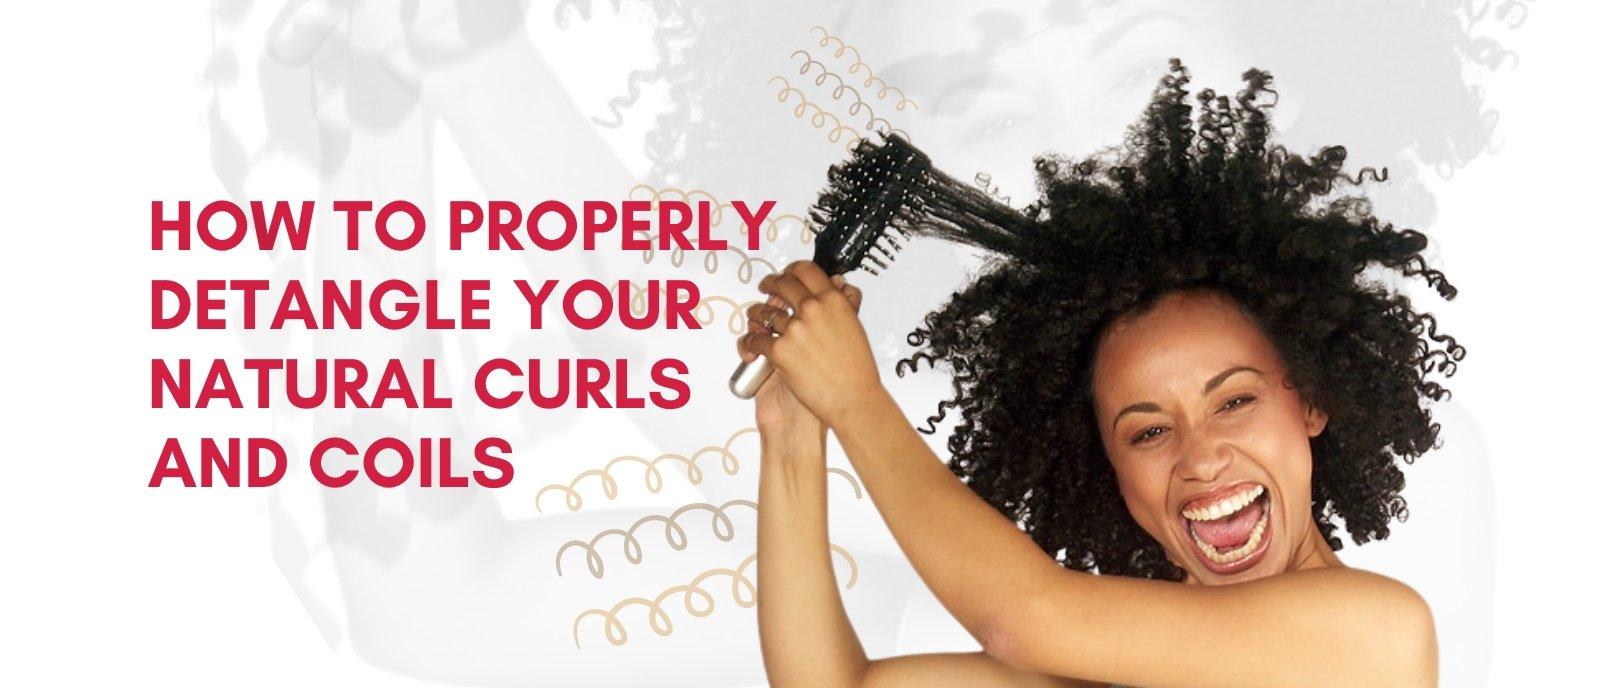 How To Properly Detangle Your Natural Curls and Coils - GlammedNaturallyOil